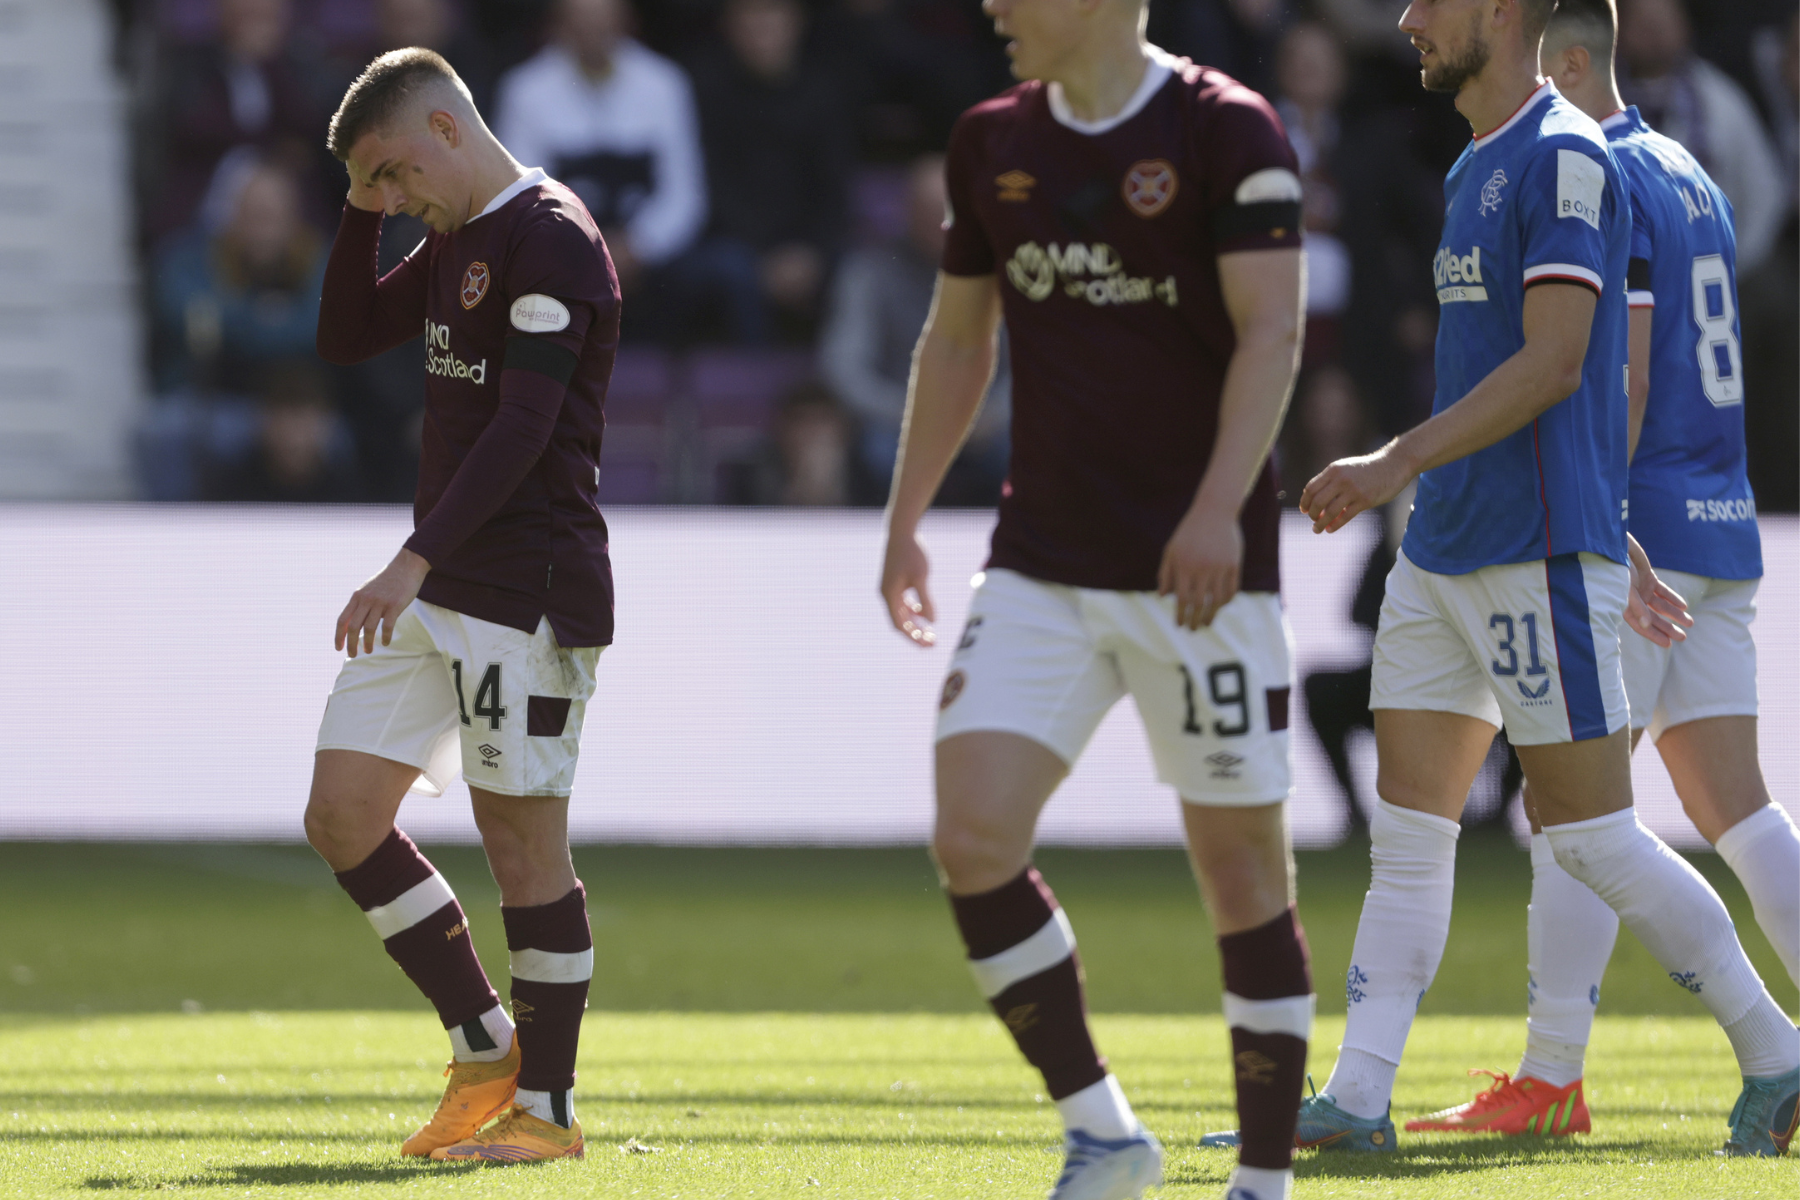 Hearts enforcer Cammy Devlin backed to bounce back from Rabbi Matondo red card against Rangers 'tougher'